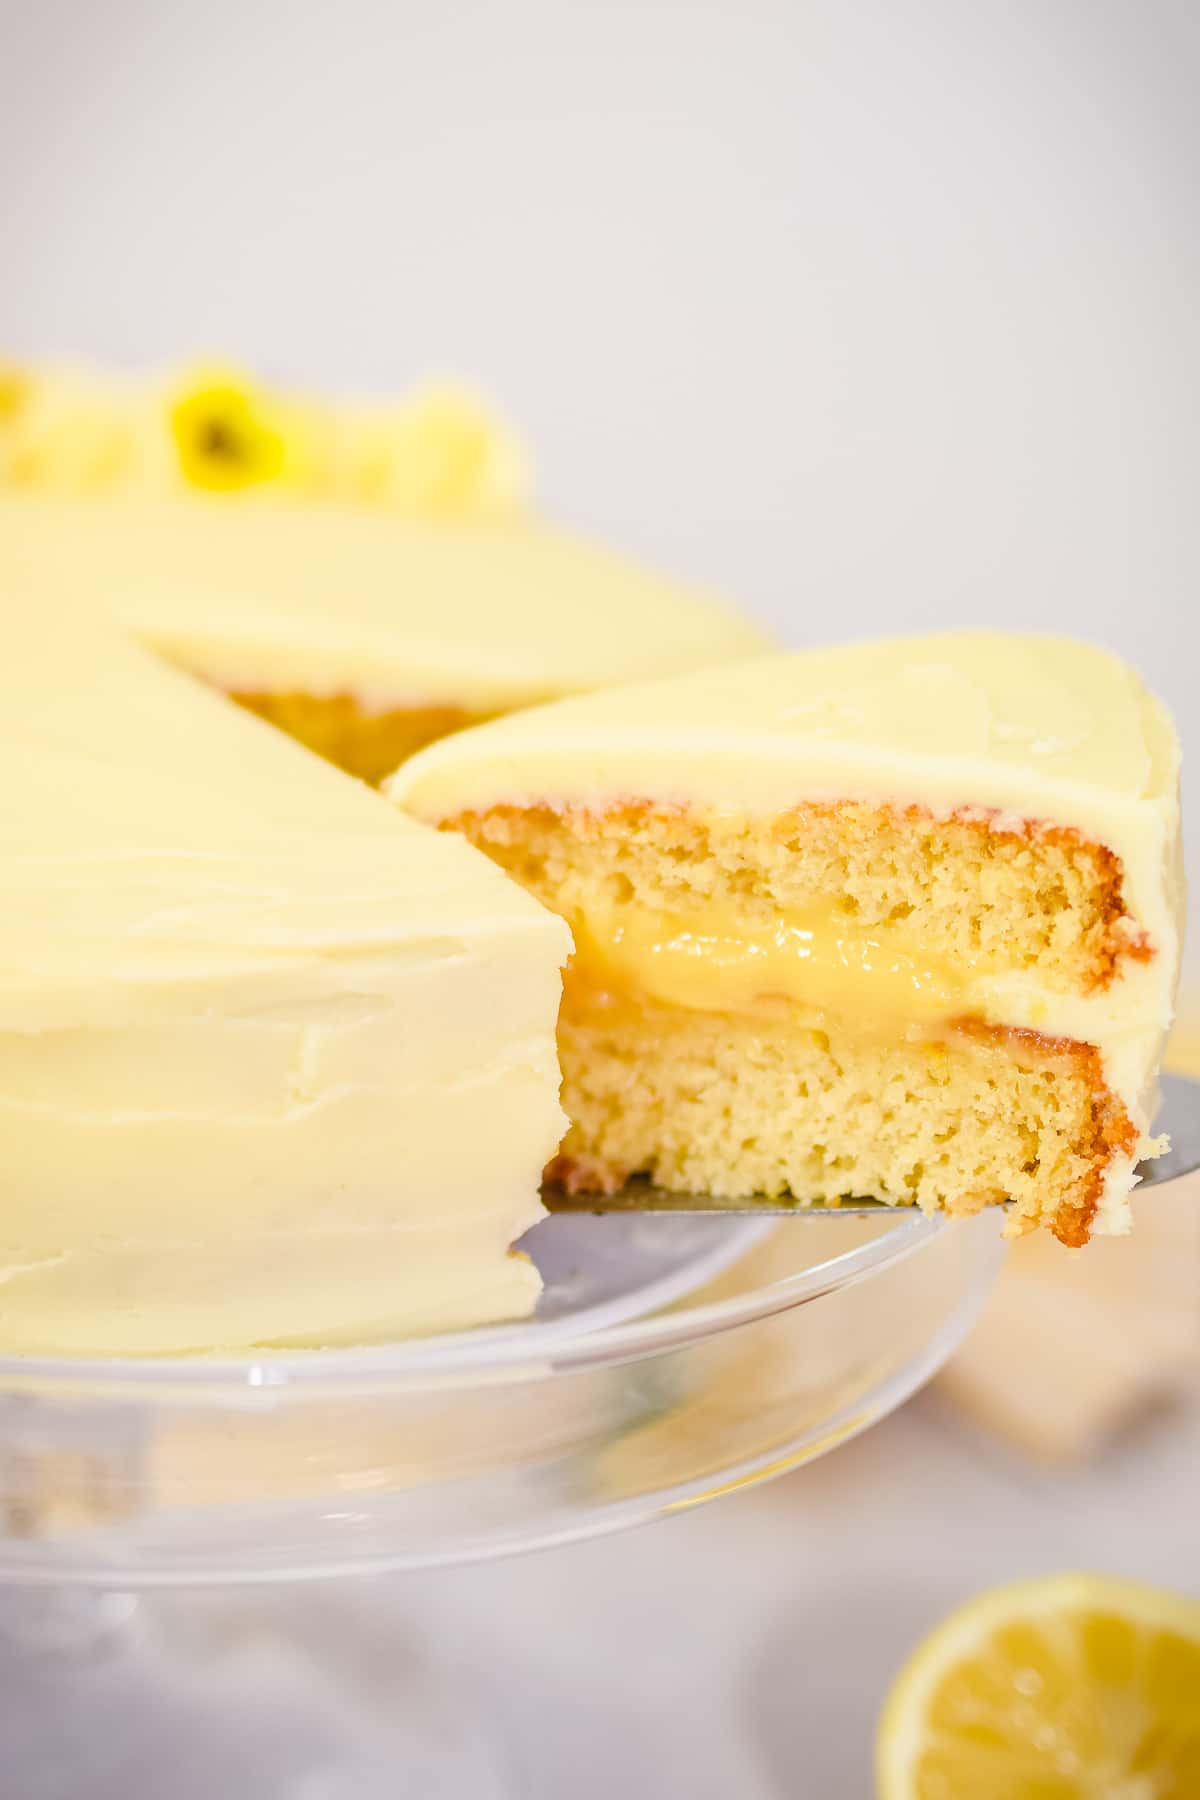 lemon curd cake on a cake stand with a slice taken out showing the curd filling